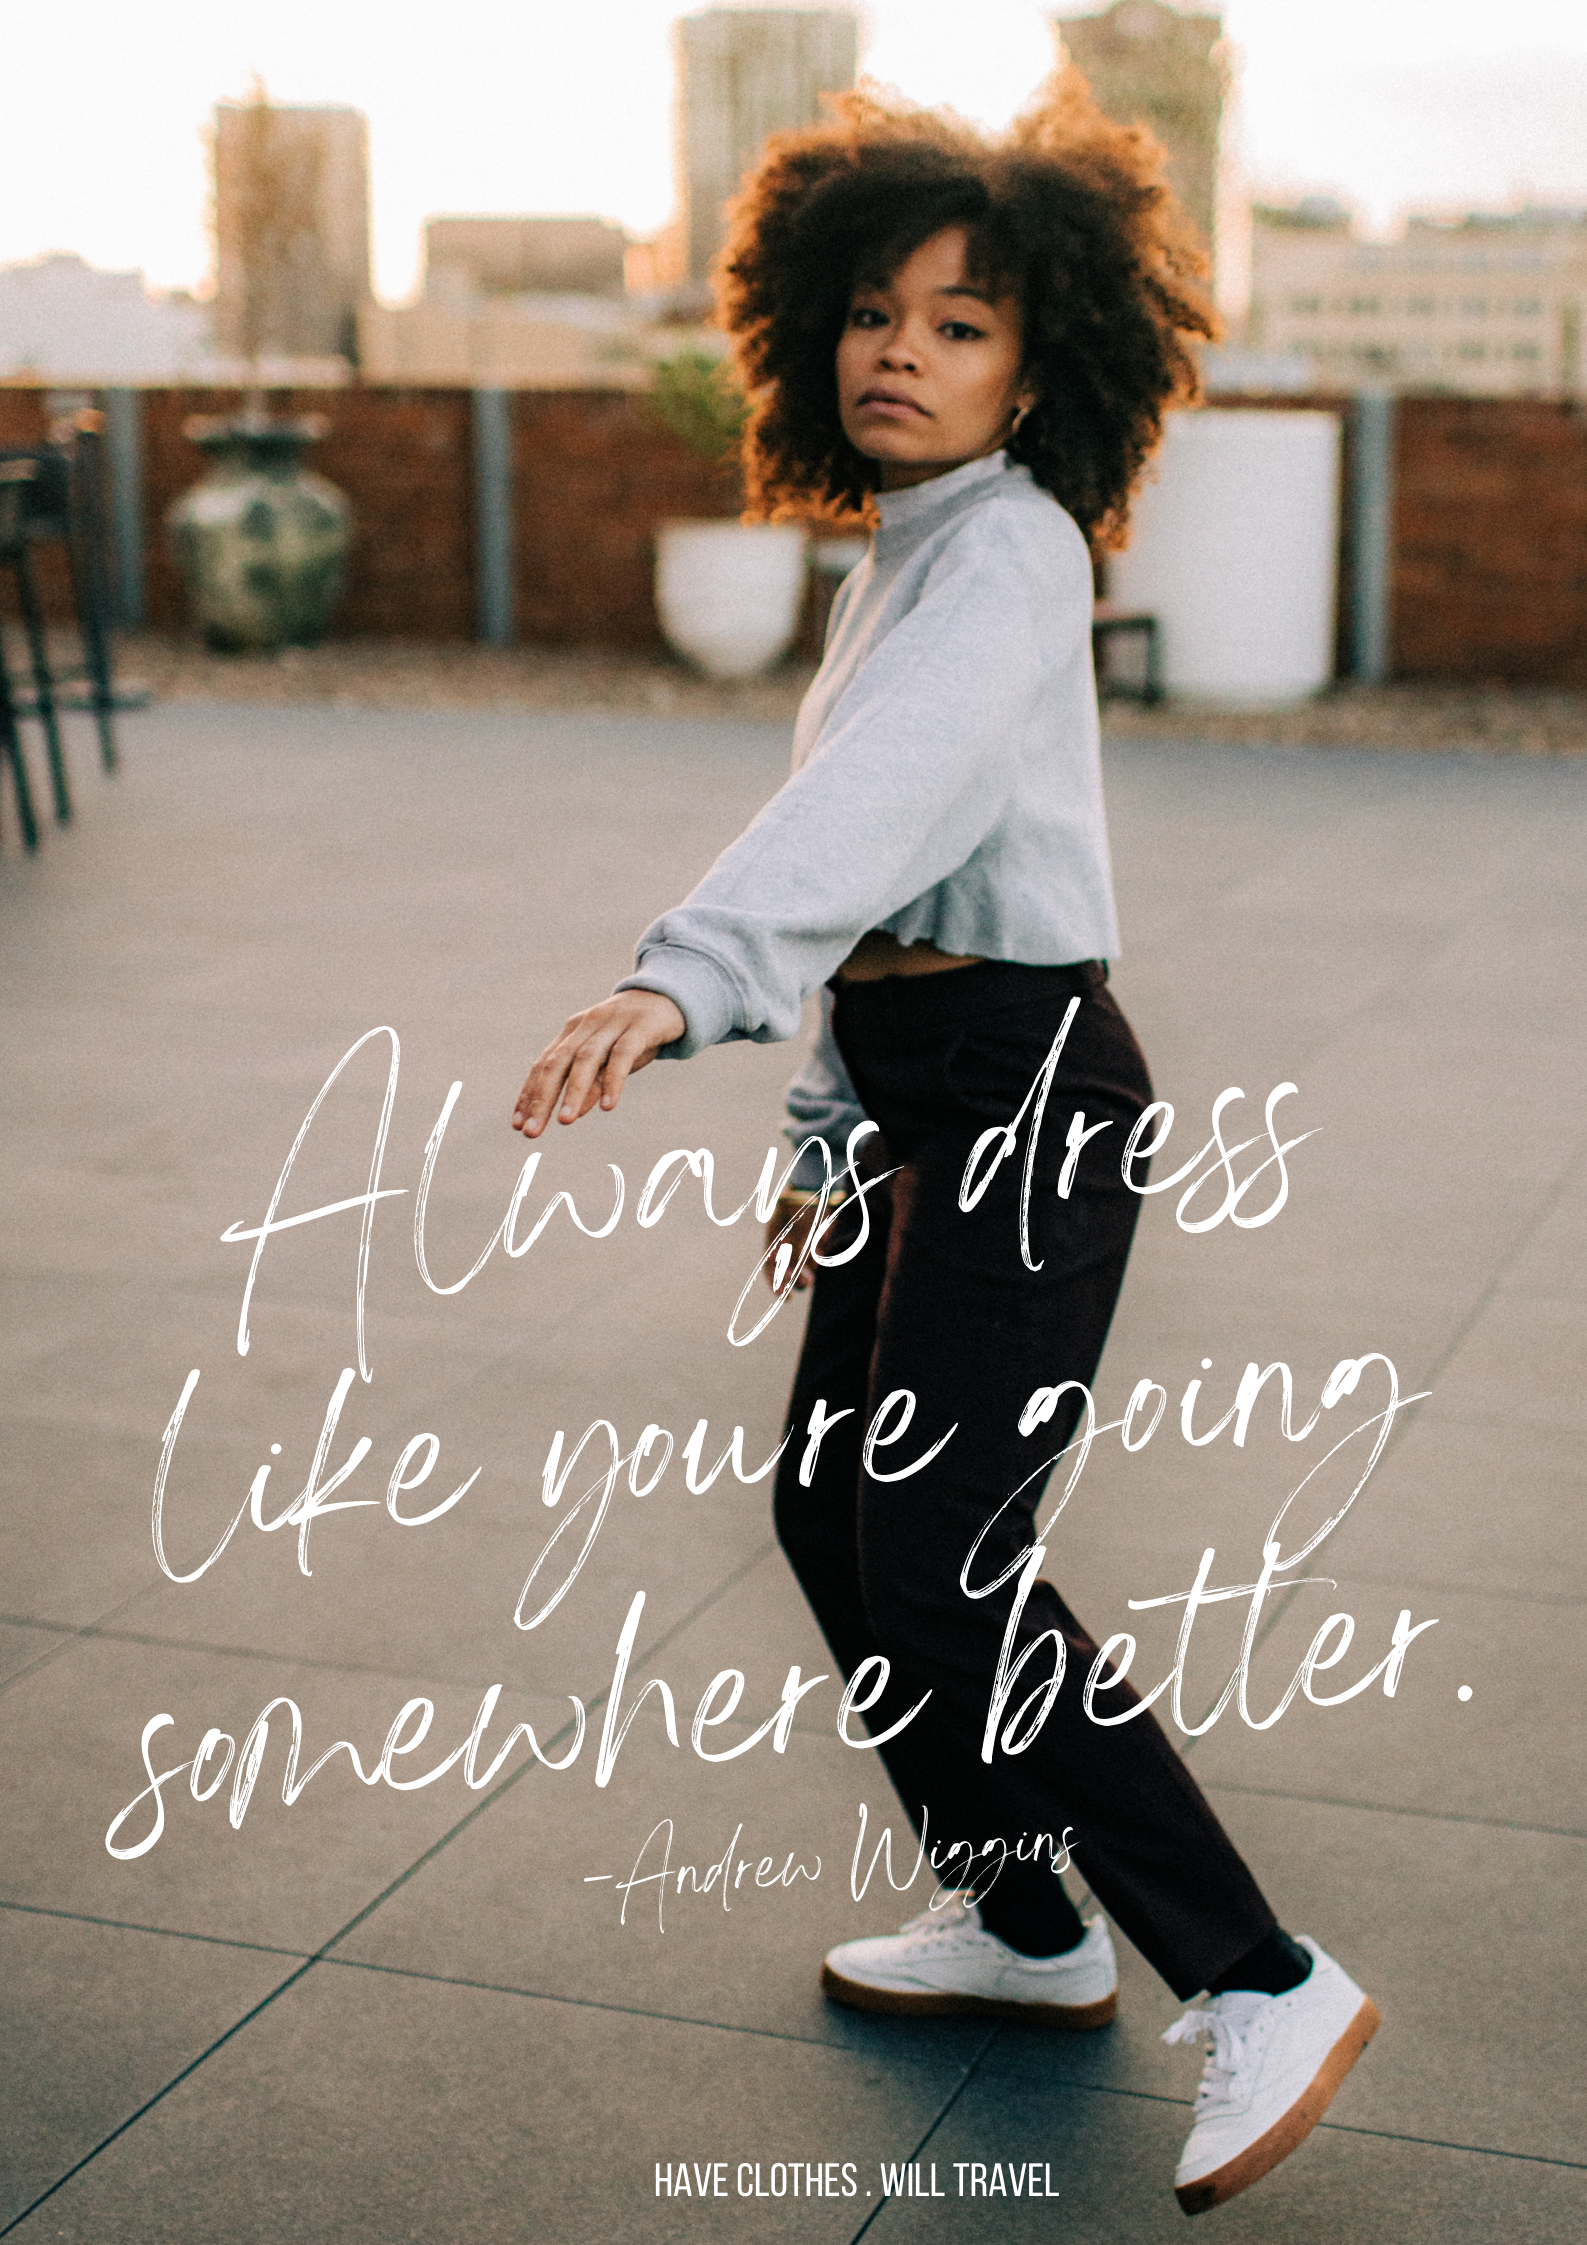 200+ Style and Fashion Quotes | Have Clothes Will Travel